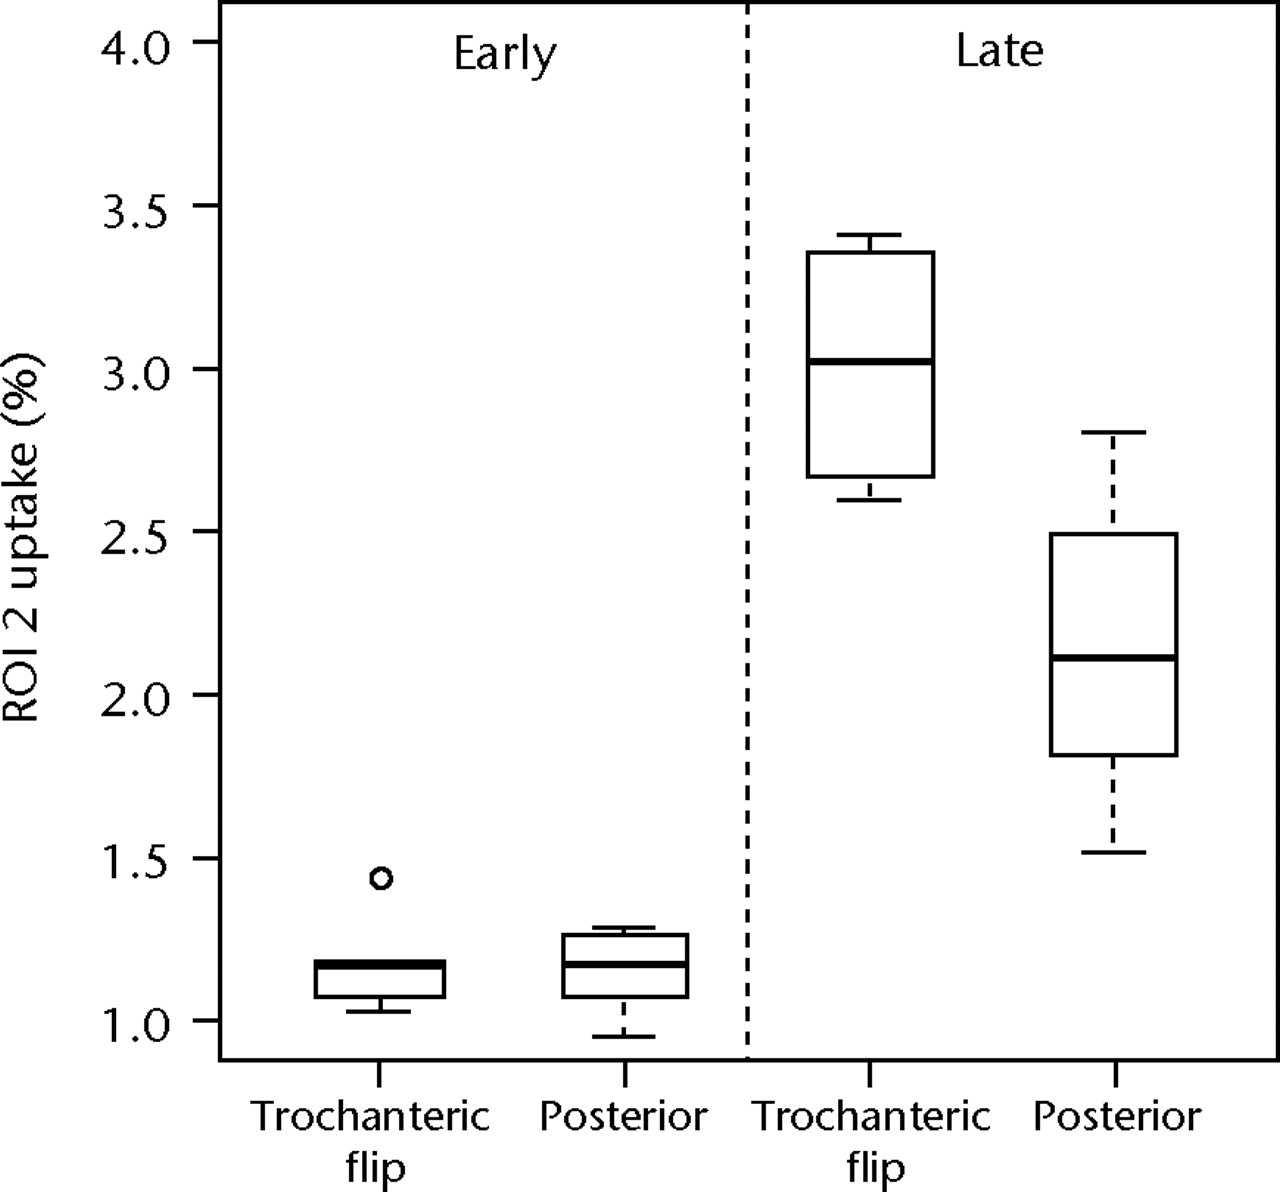 Figs. 3a - 3b 
          Boxplots of radionuclide uptake
for a) region of interest (ROI) 1 and b) ROI 2 for planar image
data, both expressed as a percentage of uptake in ROI 3, for each
surgical approach (trochanteric flip and posterior) for late and
early data. The boxes represent the median and interquartile range
(IQR), the whiskers denote 1.5×IQR and ° denotes outliers.
        